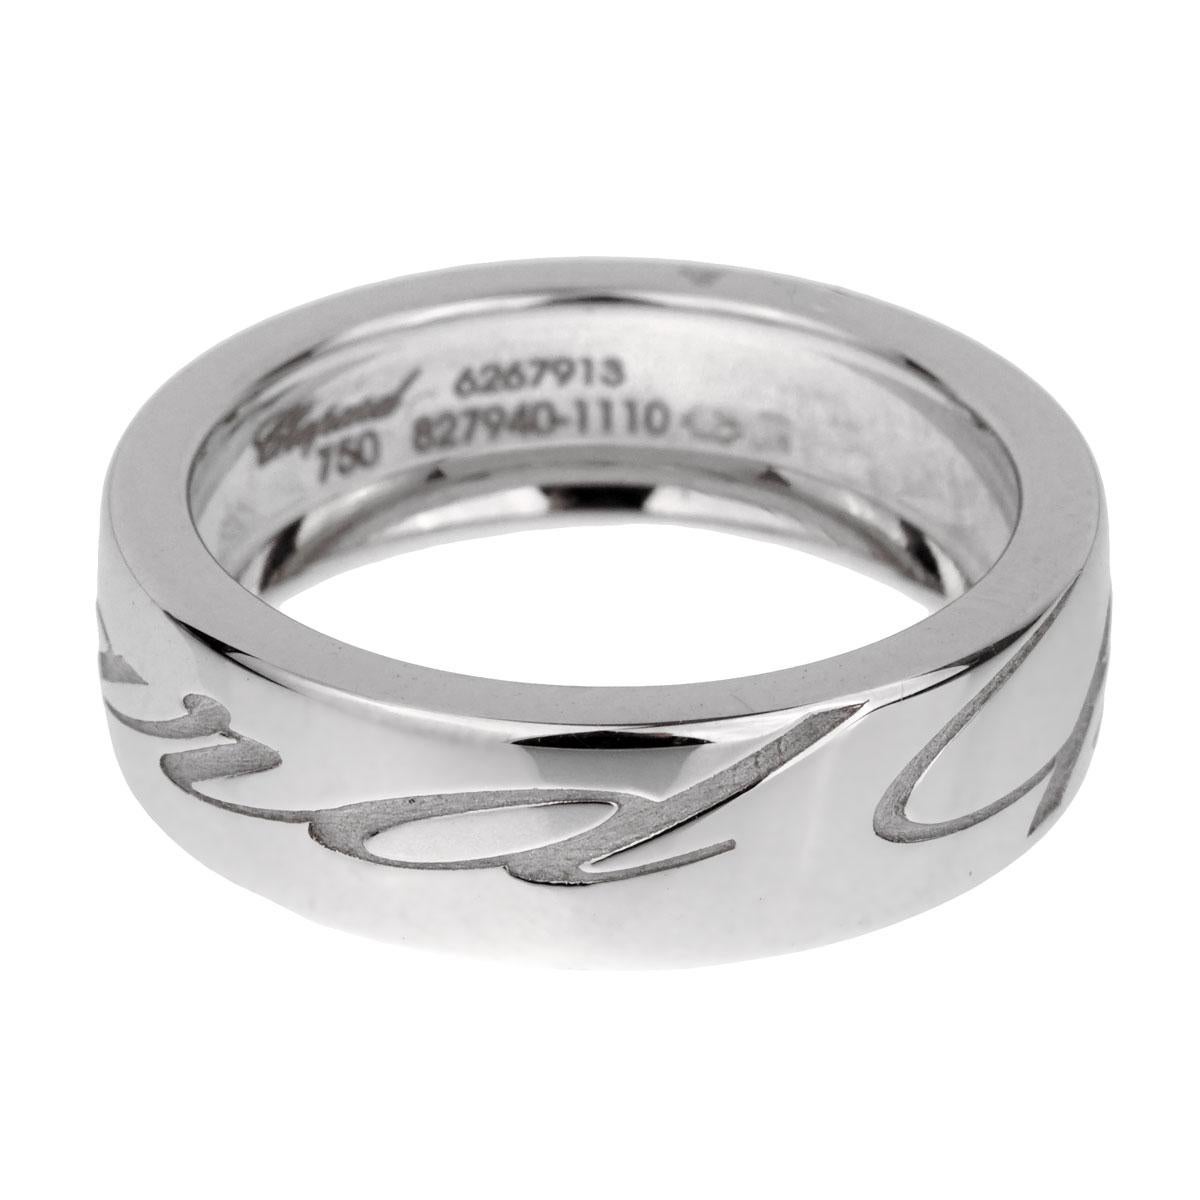 A chic Chopard band ring engraved with the iconic Chopard logo throughout in 18k white gold. The ring measures a size 6